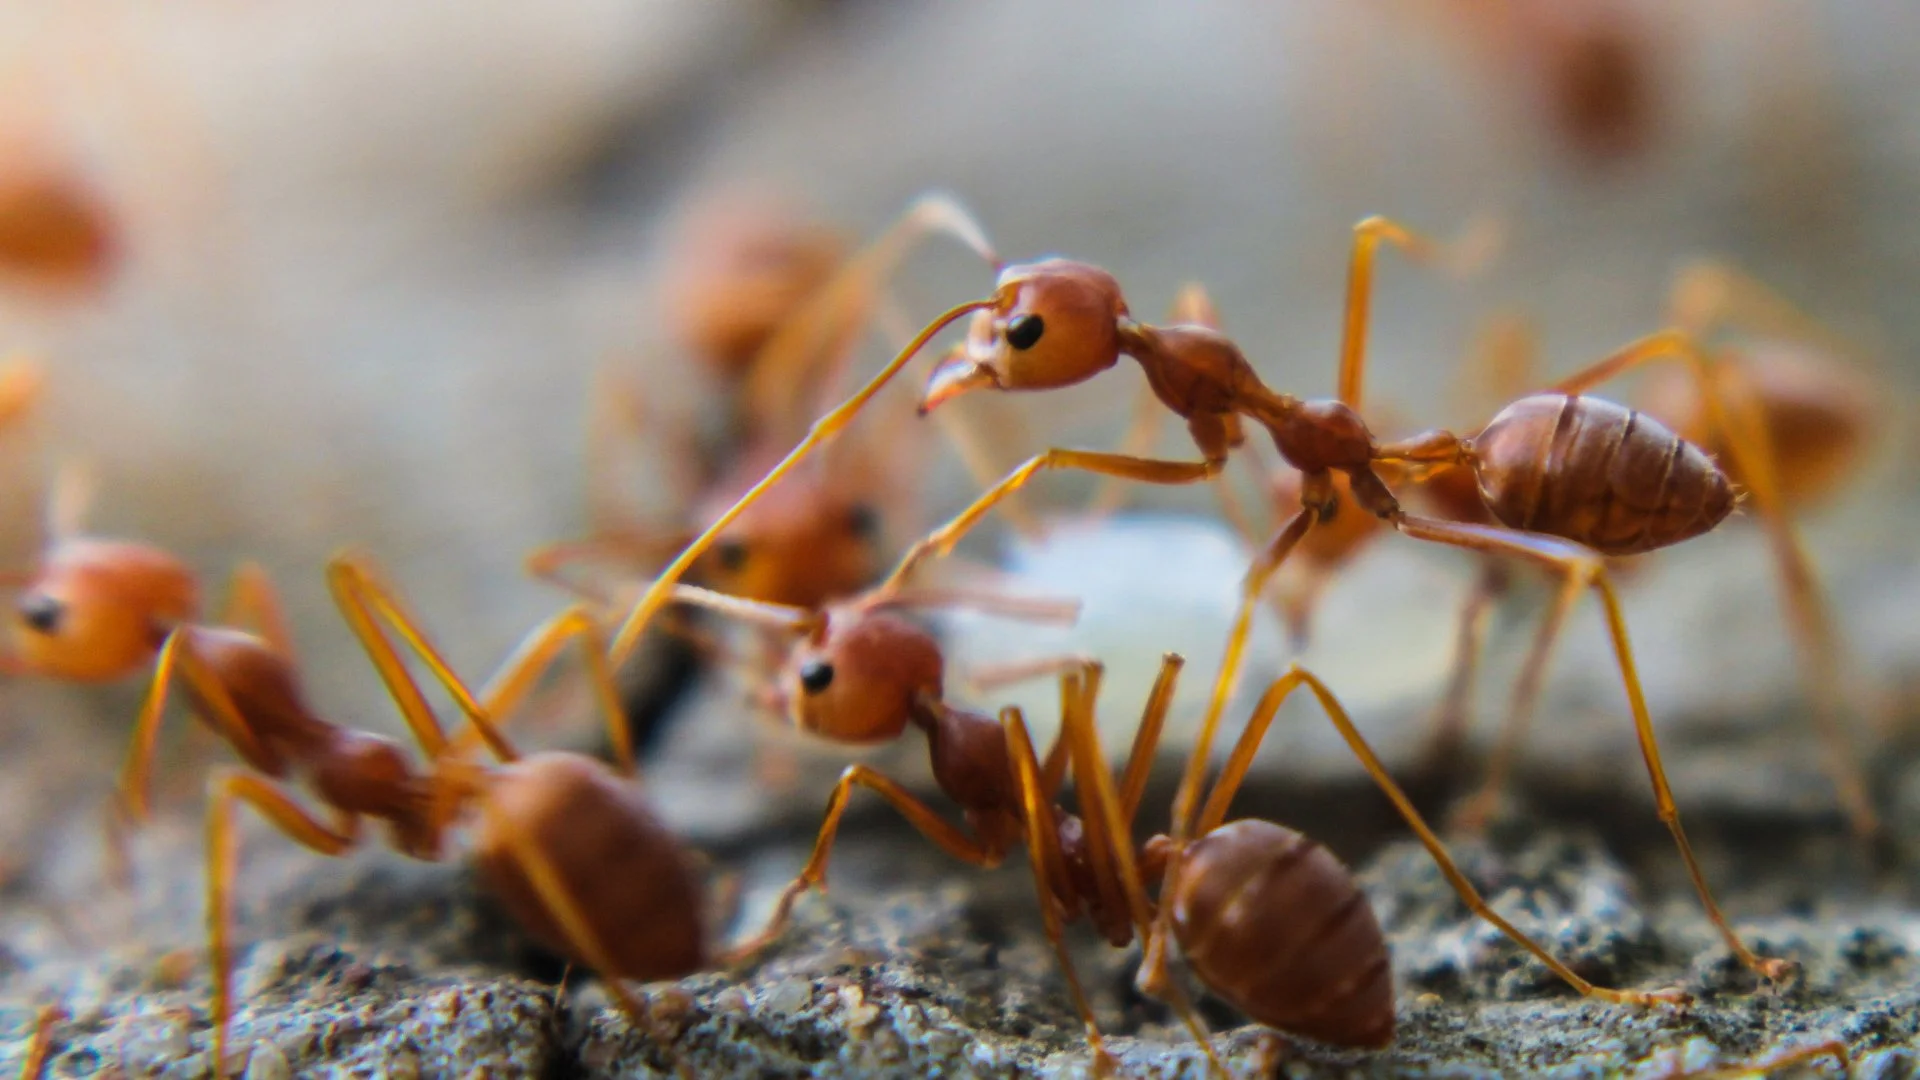 Do Fire Ant Control Treatments Last a Long Time?